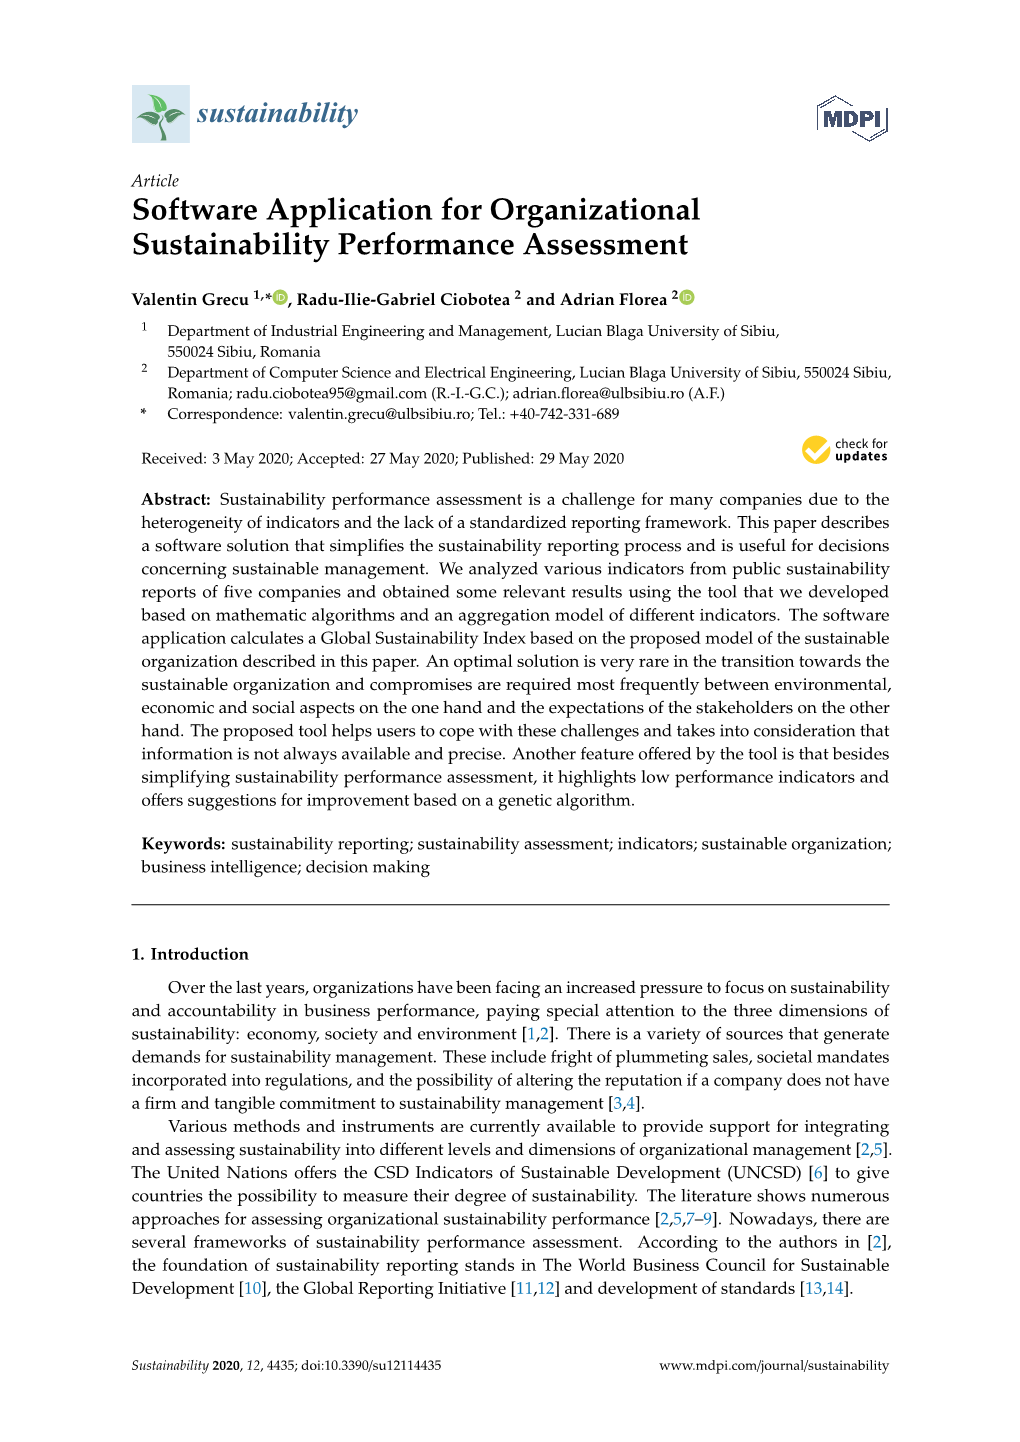 Software Application for Organizational Sustainability Performance Assessment